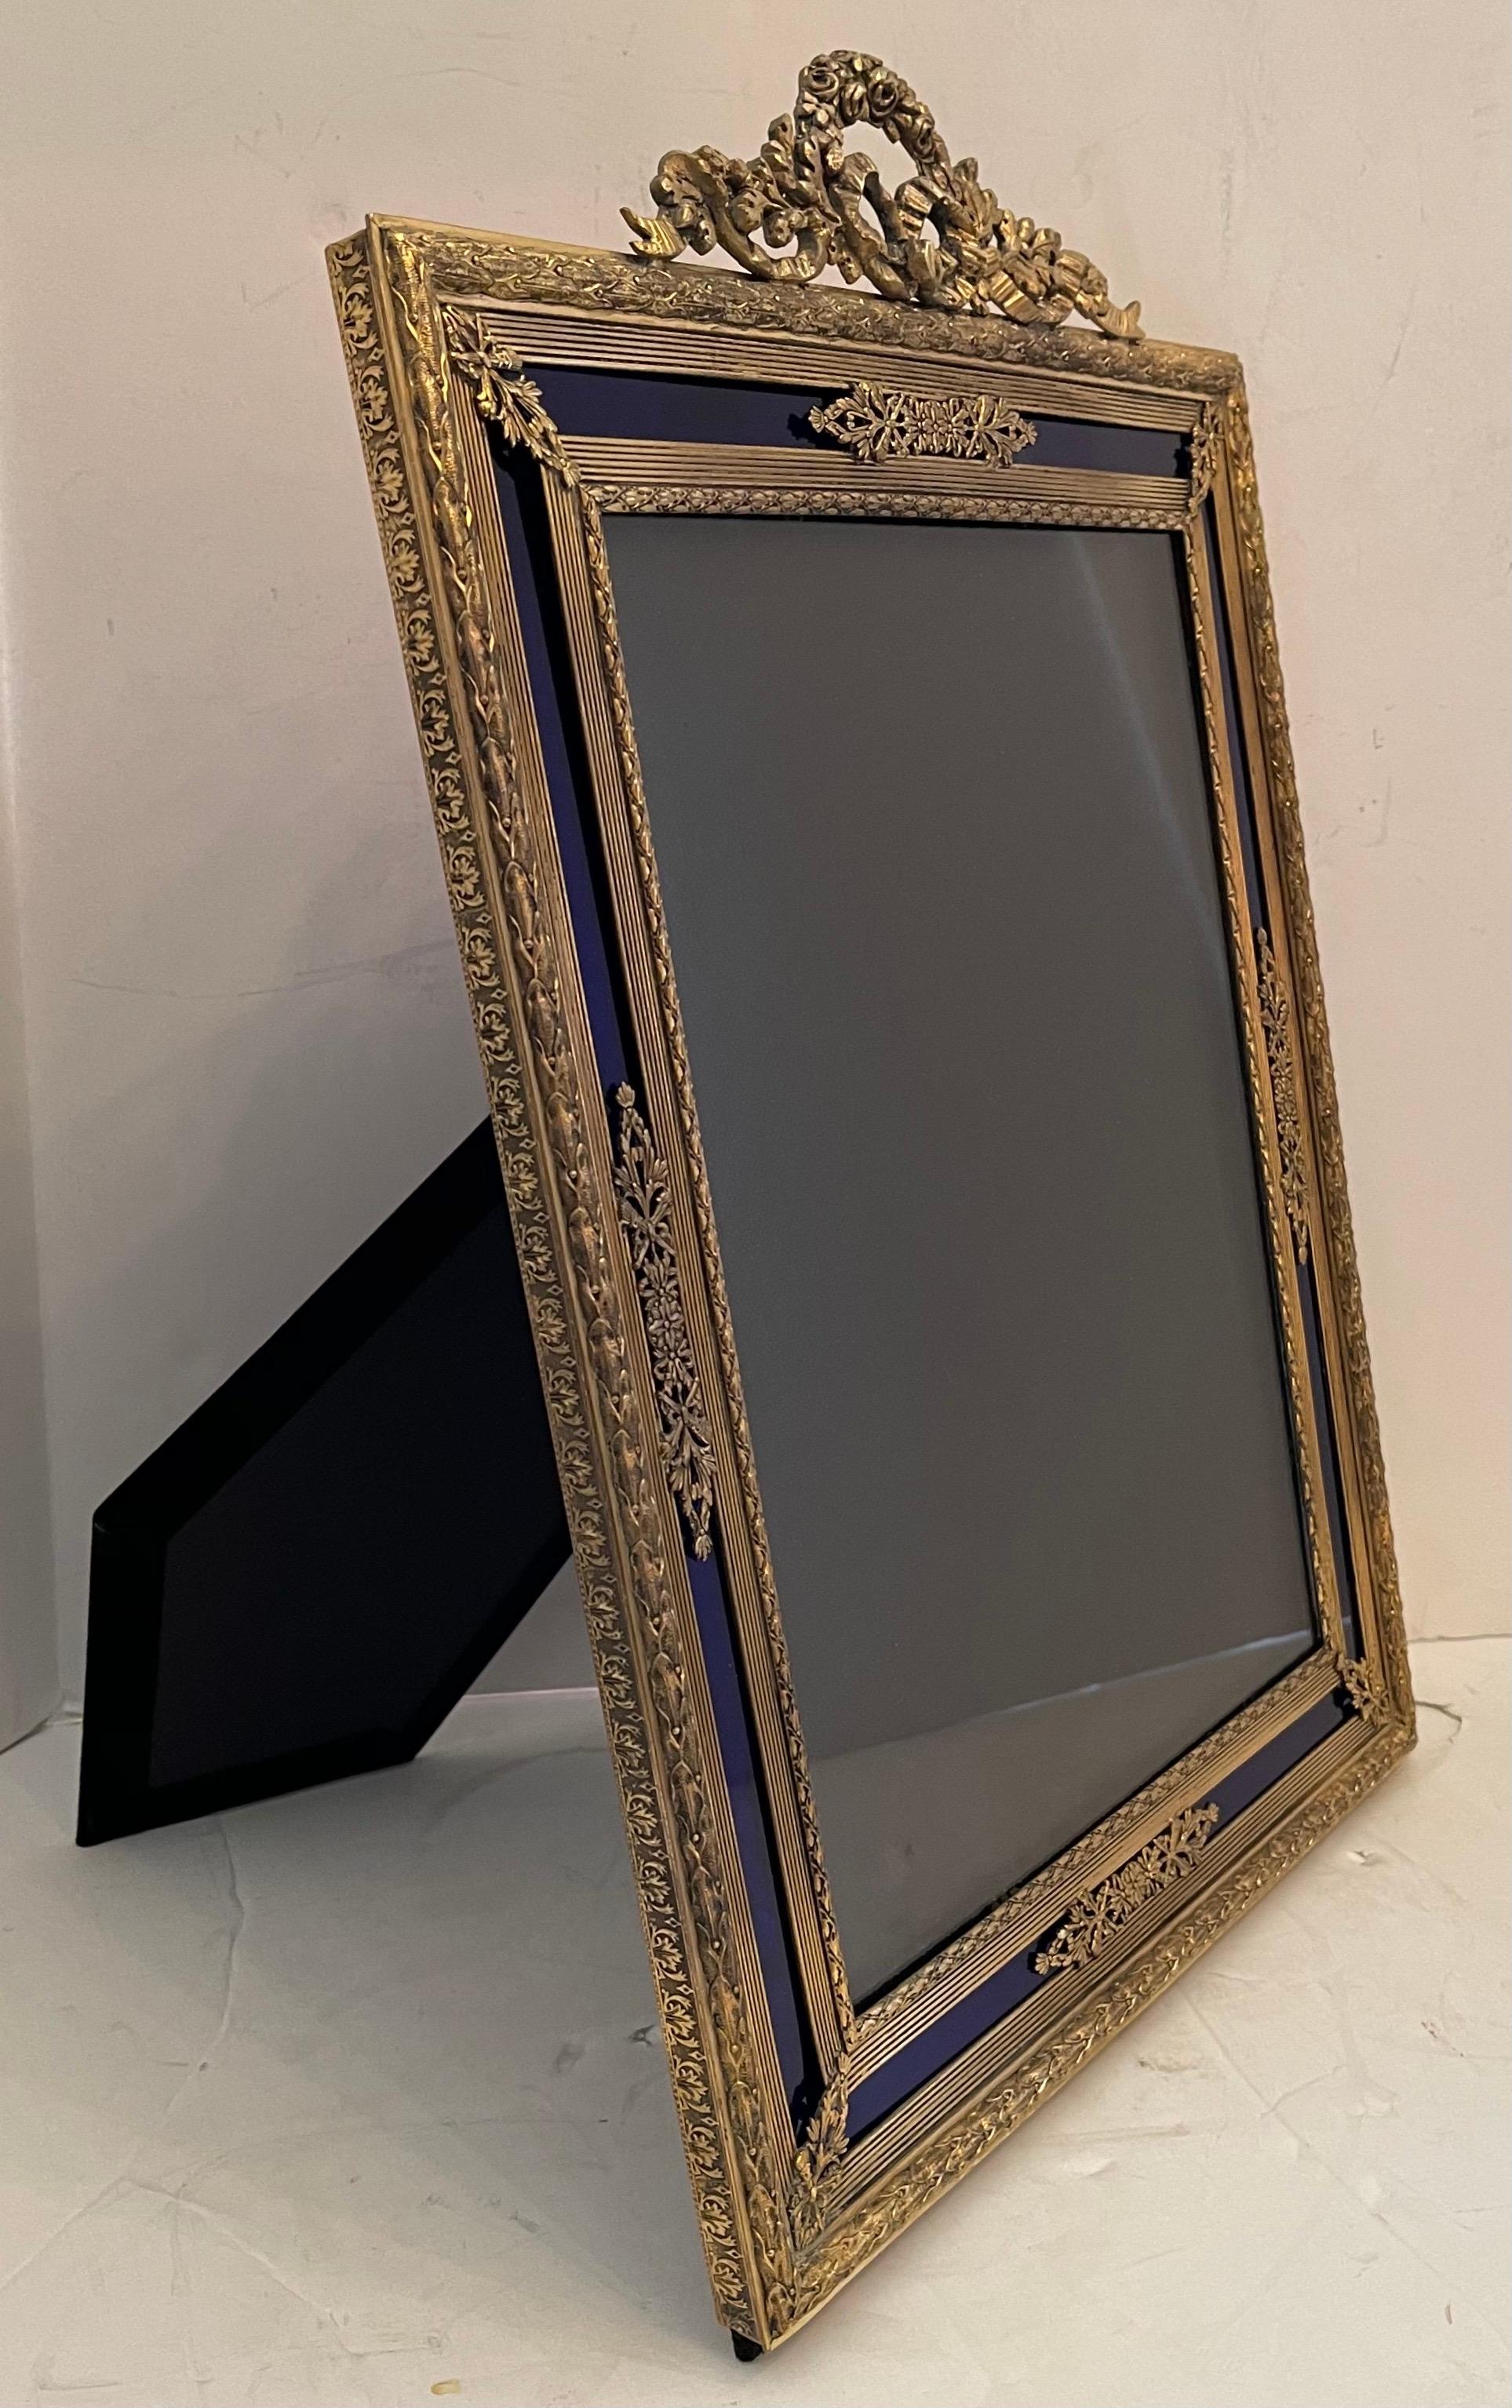 A wonderful large French Louis XVI ormolu bronze & blue glass inset picture frame with wreath & garland crown.